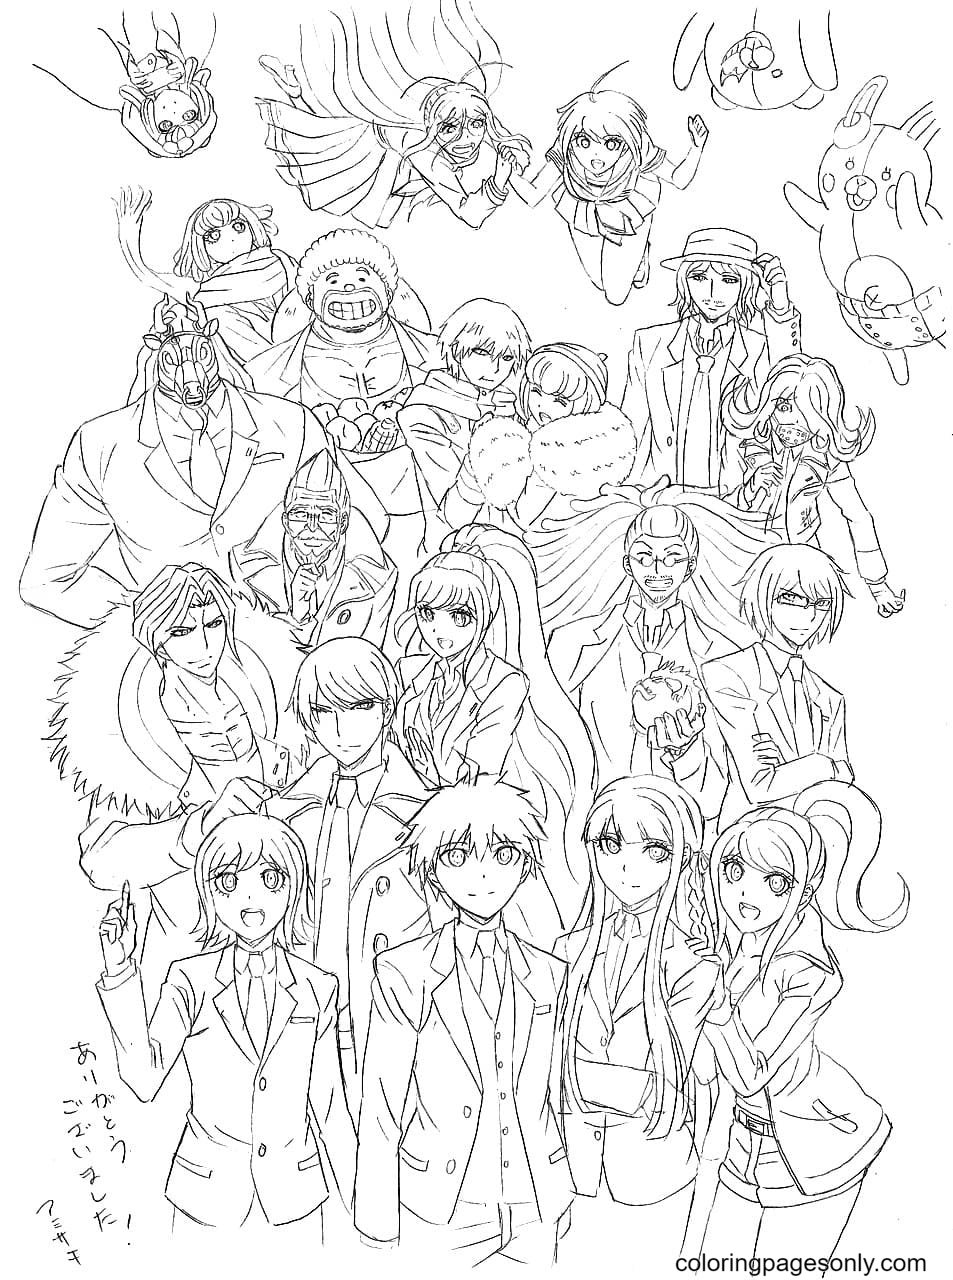 Characters from the anime Danganronpa Coloring Pages